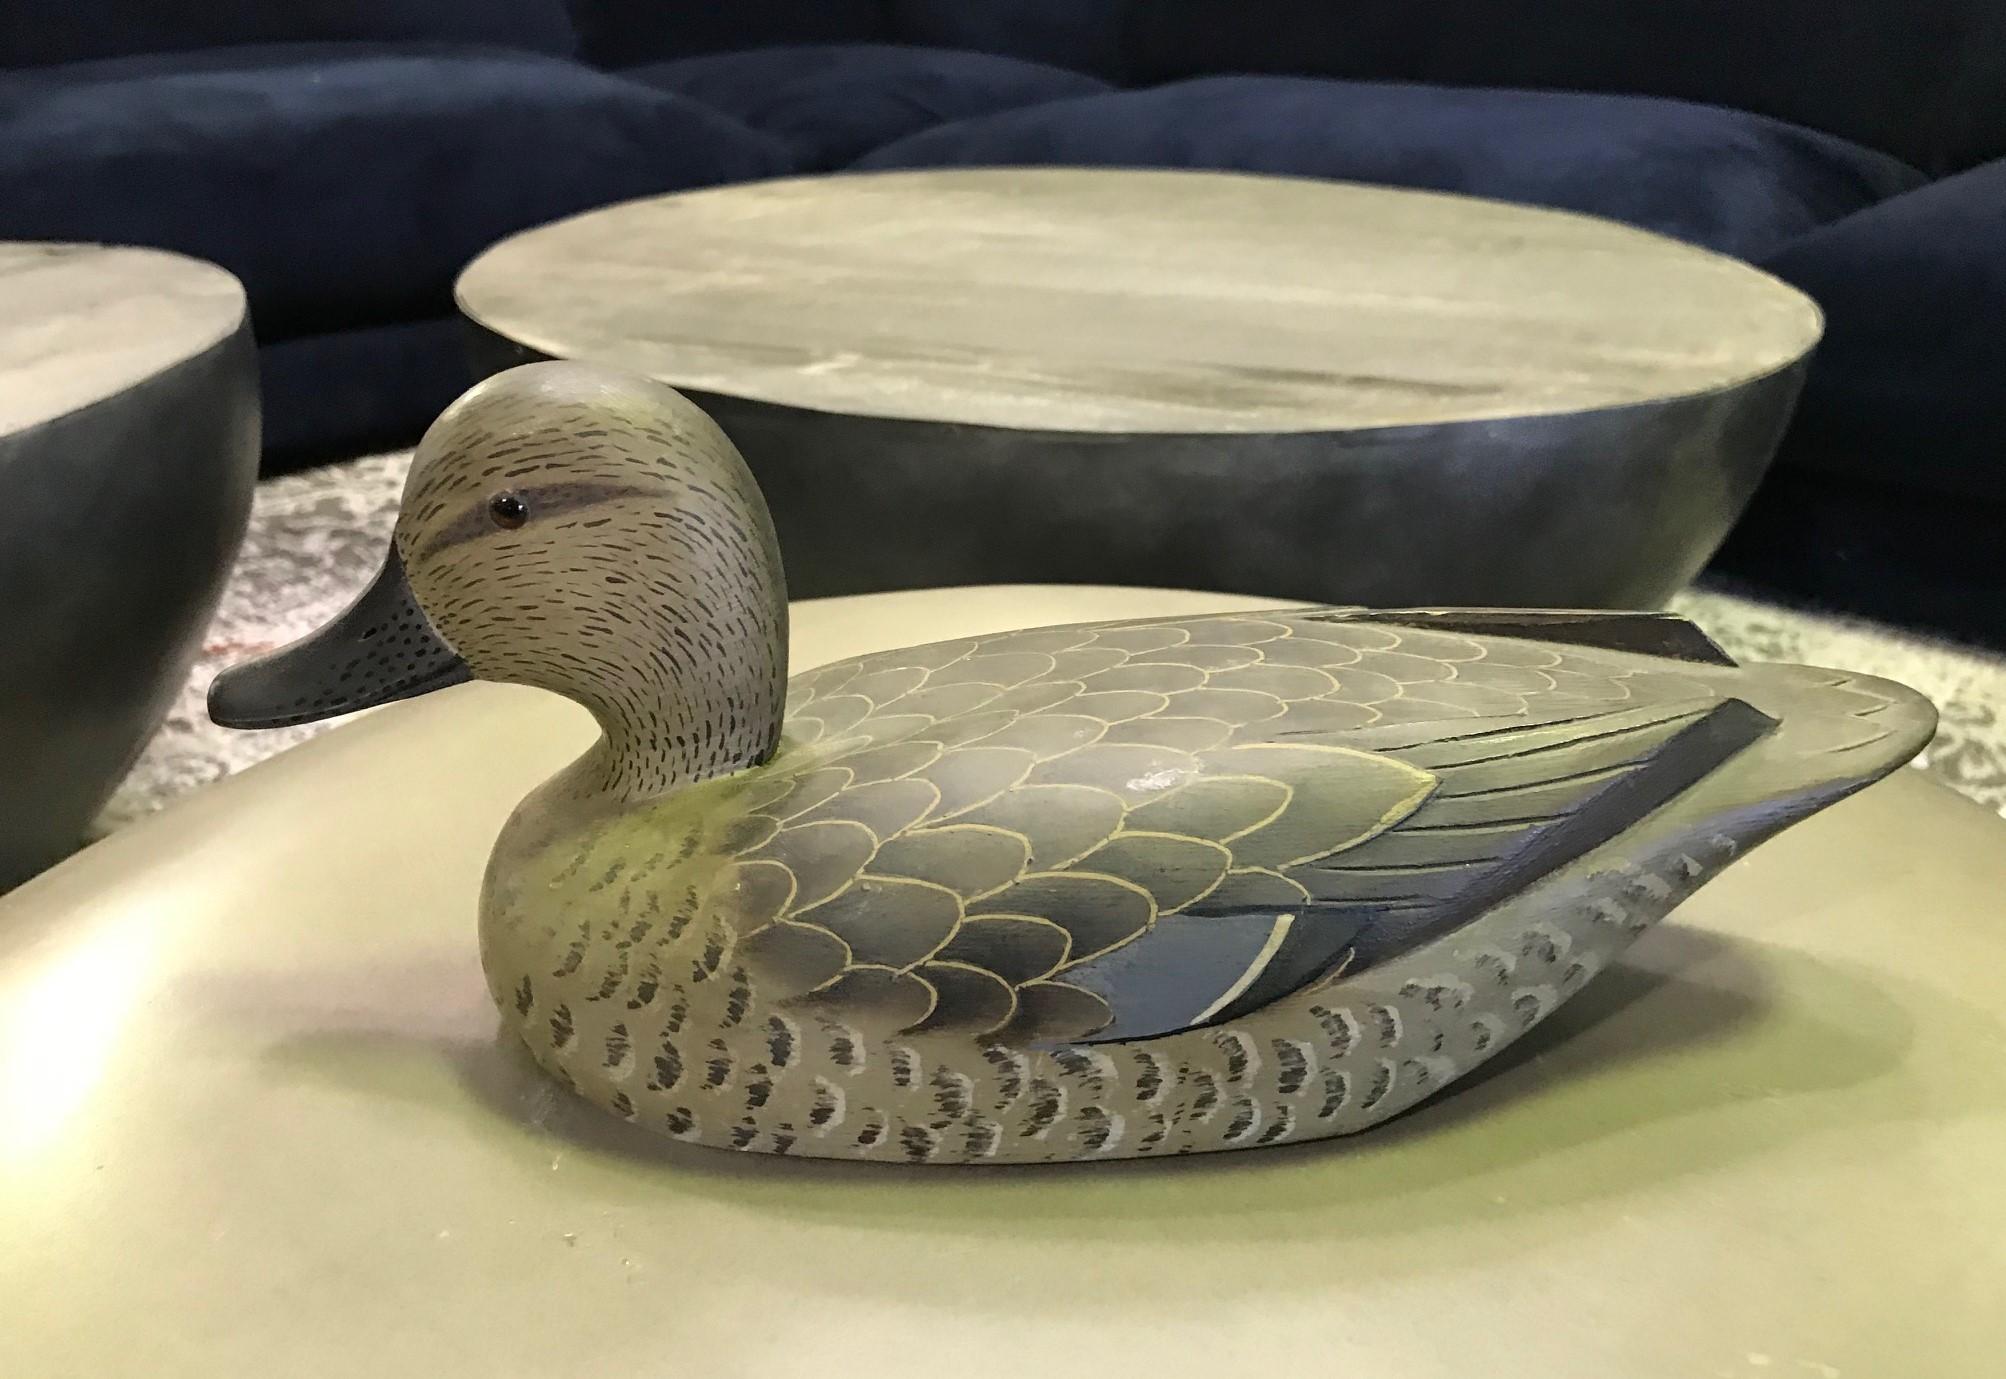 A wonderful work - a female blue wing teal - hand carved and painted by renowned duck decoy artist D W Nichol. Beautifully crafted and decorated.

The work is signed 